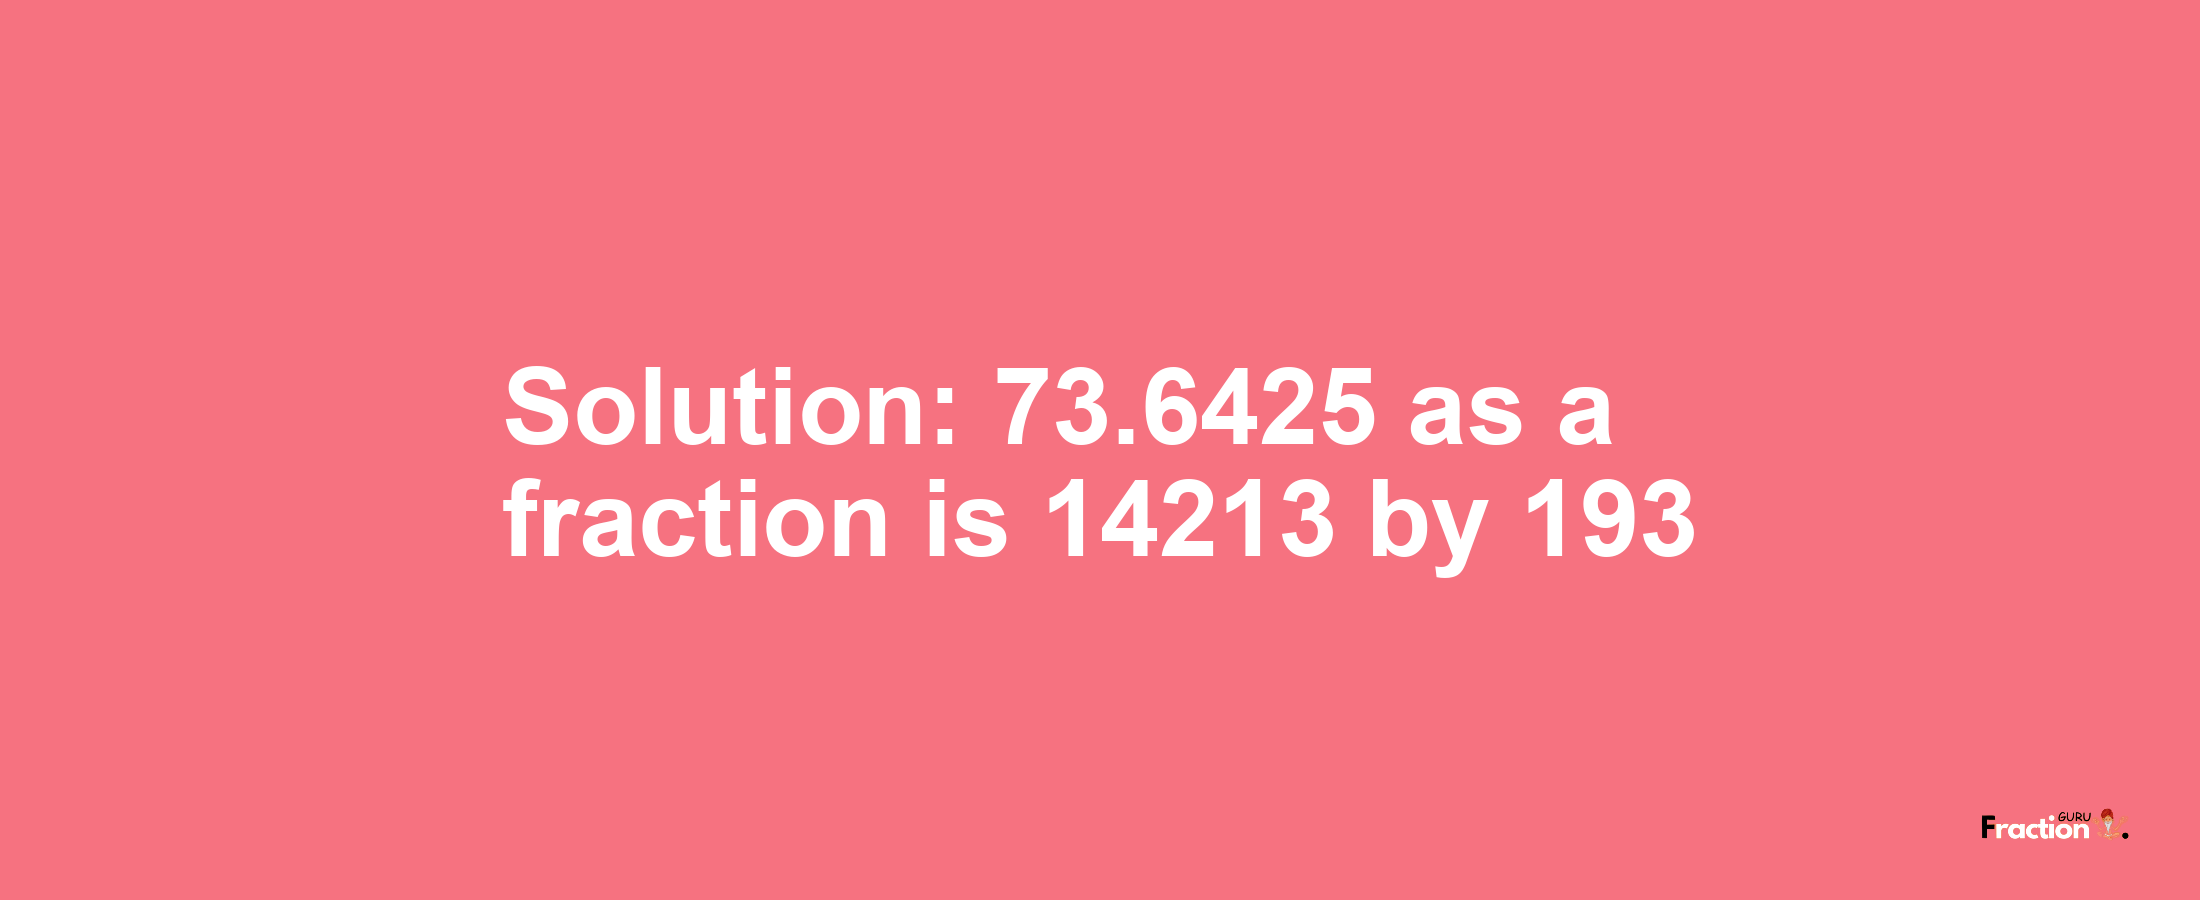 Solution:73.6425 as a fraction is 14213/193